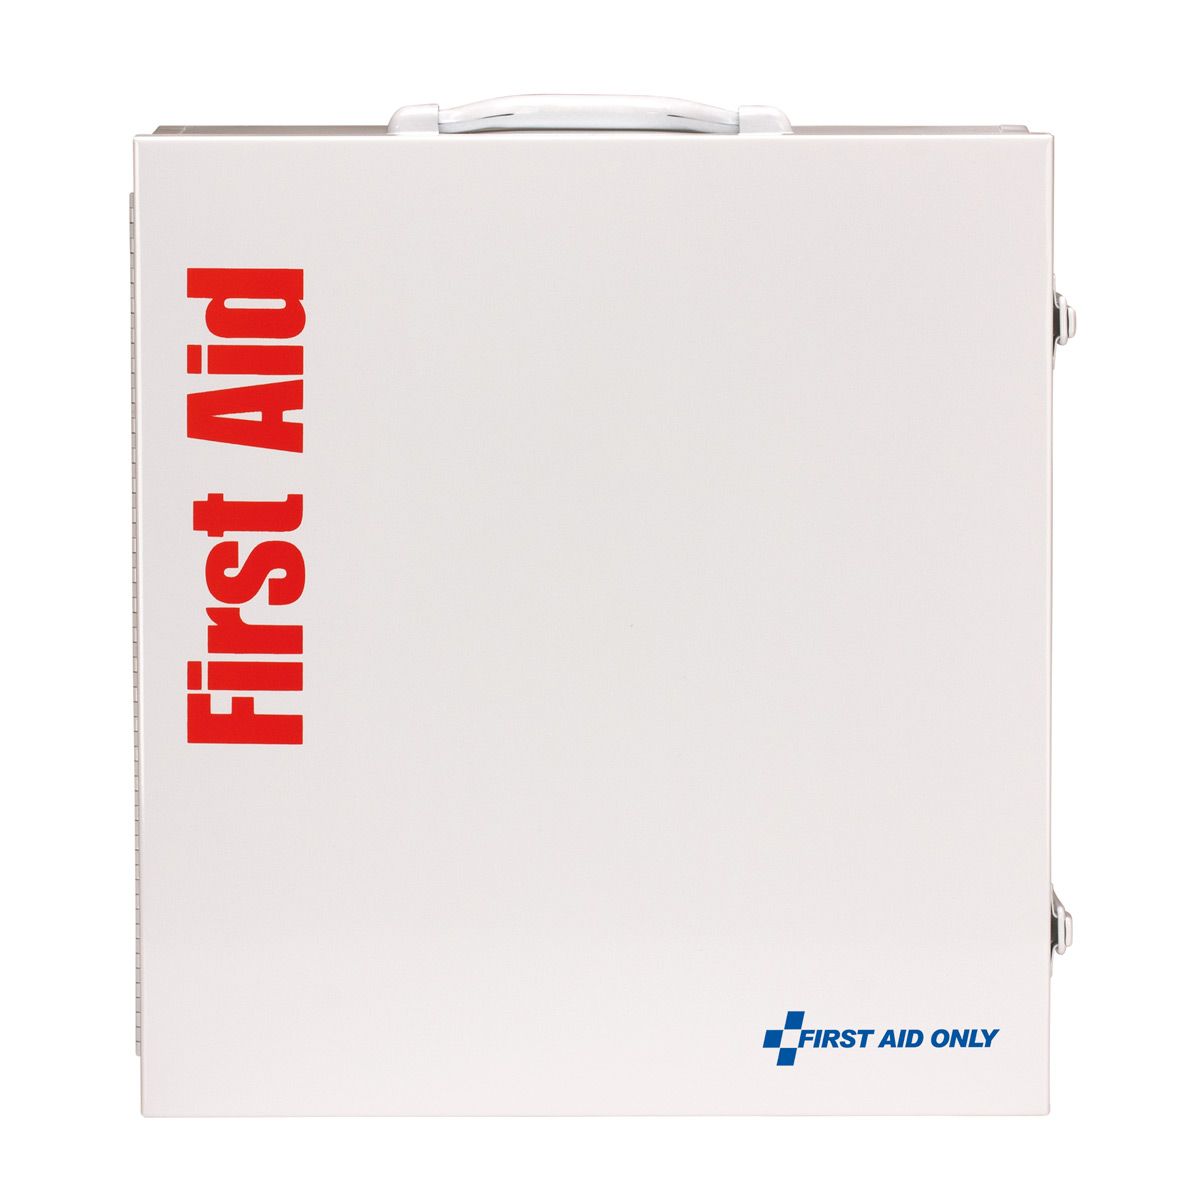 First Aid Only 100 Person ANSI B 3 Shelf First Aid Cabinet (ANSI 2021 Compliant) from Columbia Safety